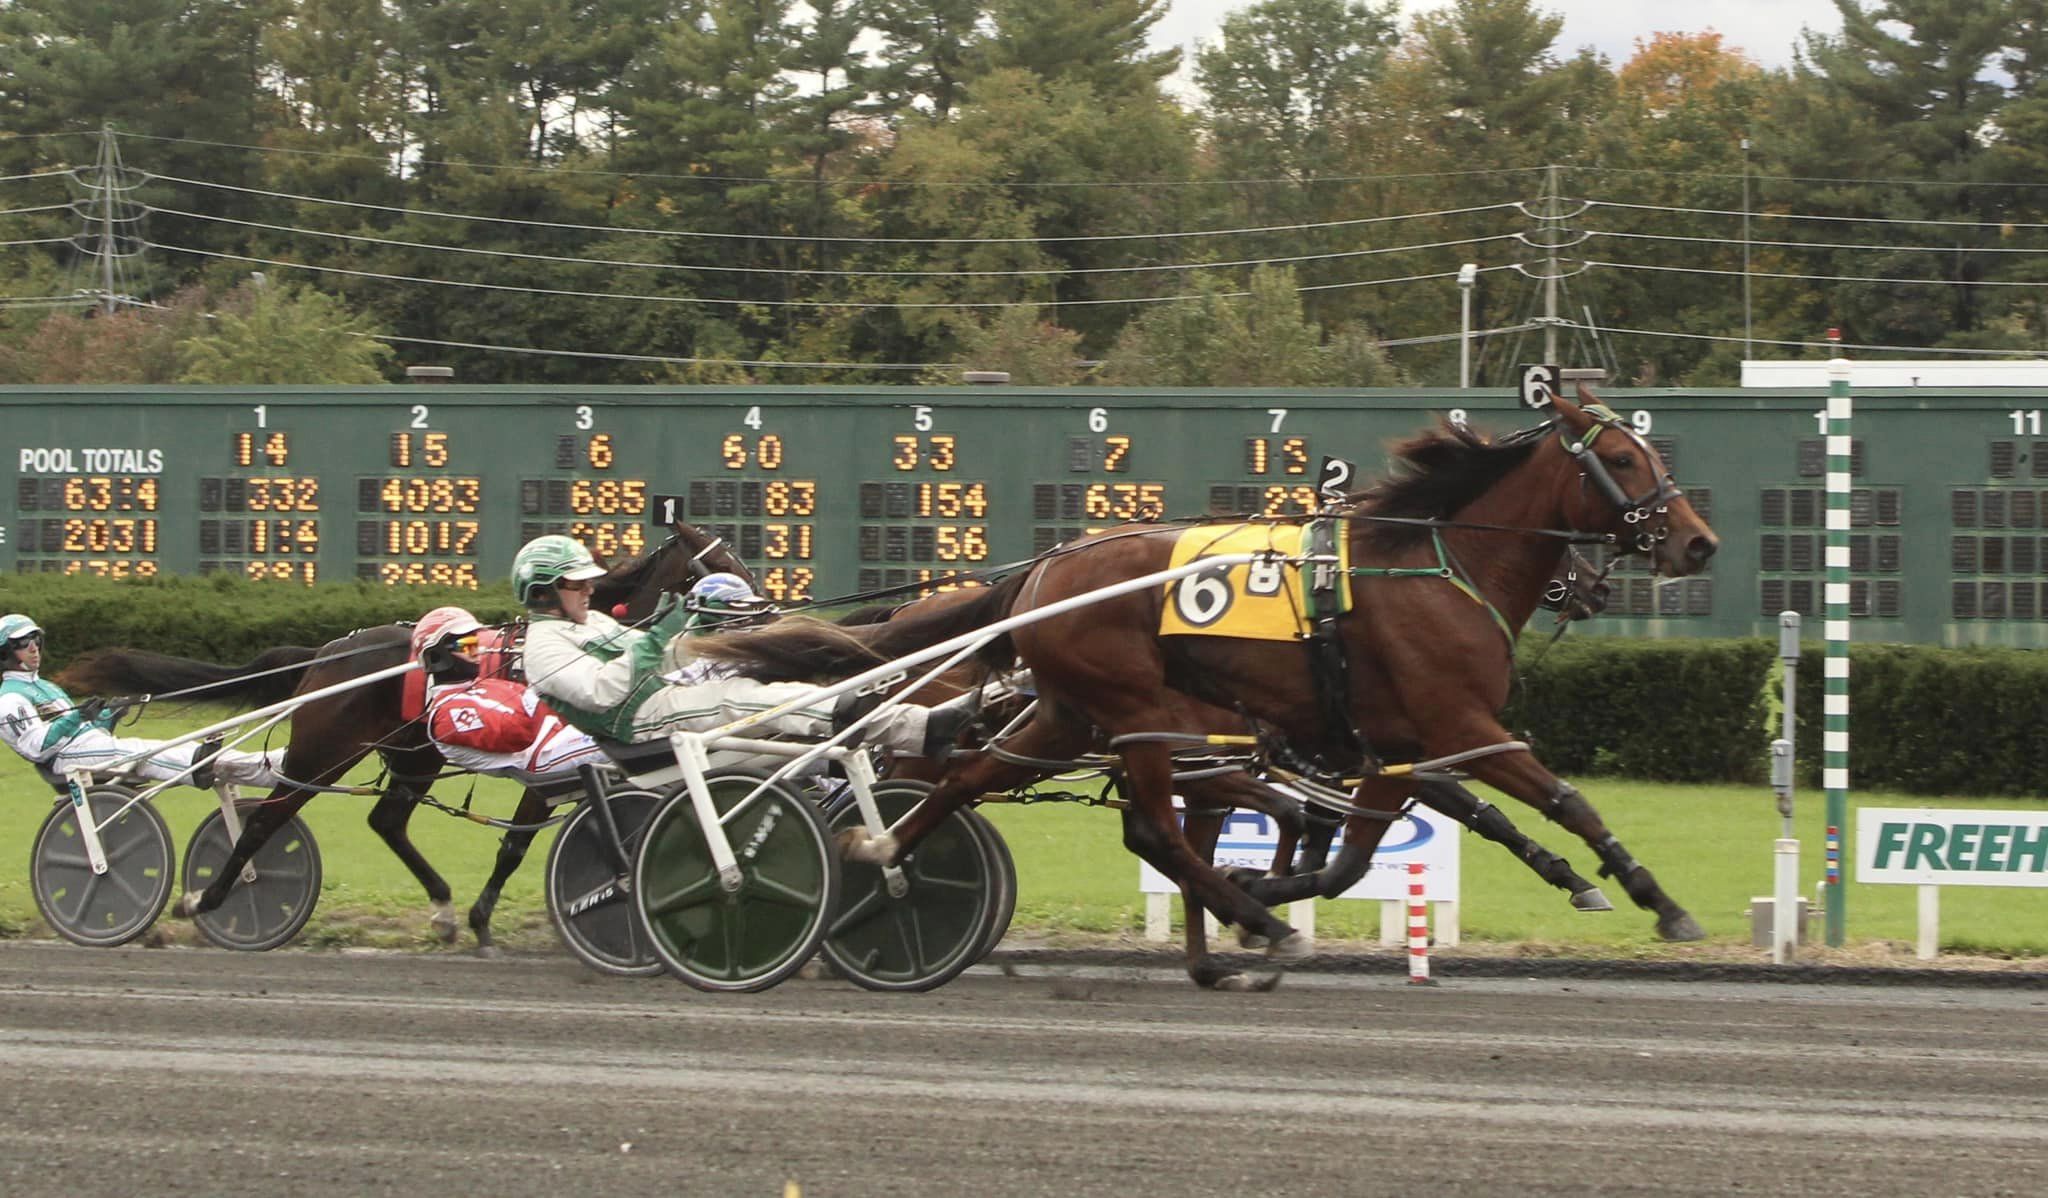 NJSS-SDF $70,000 Finals conclude at Freehold Raceway